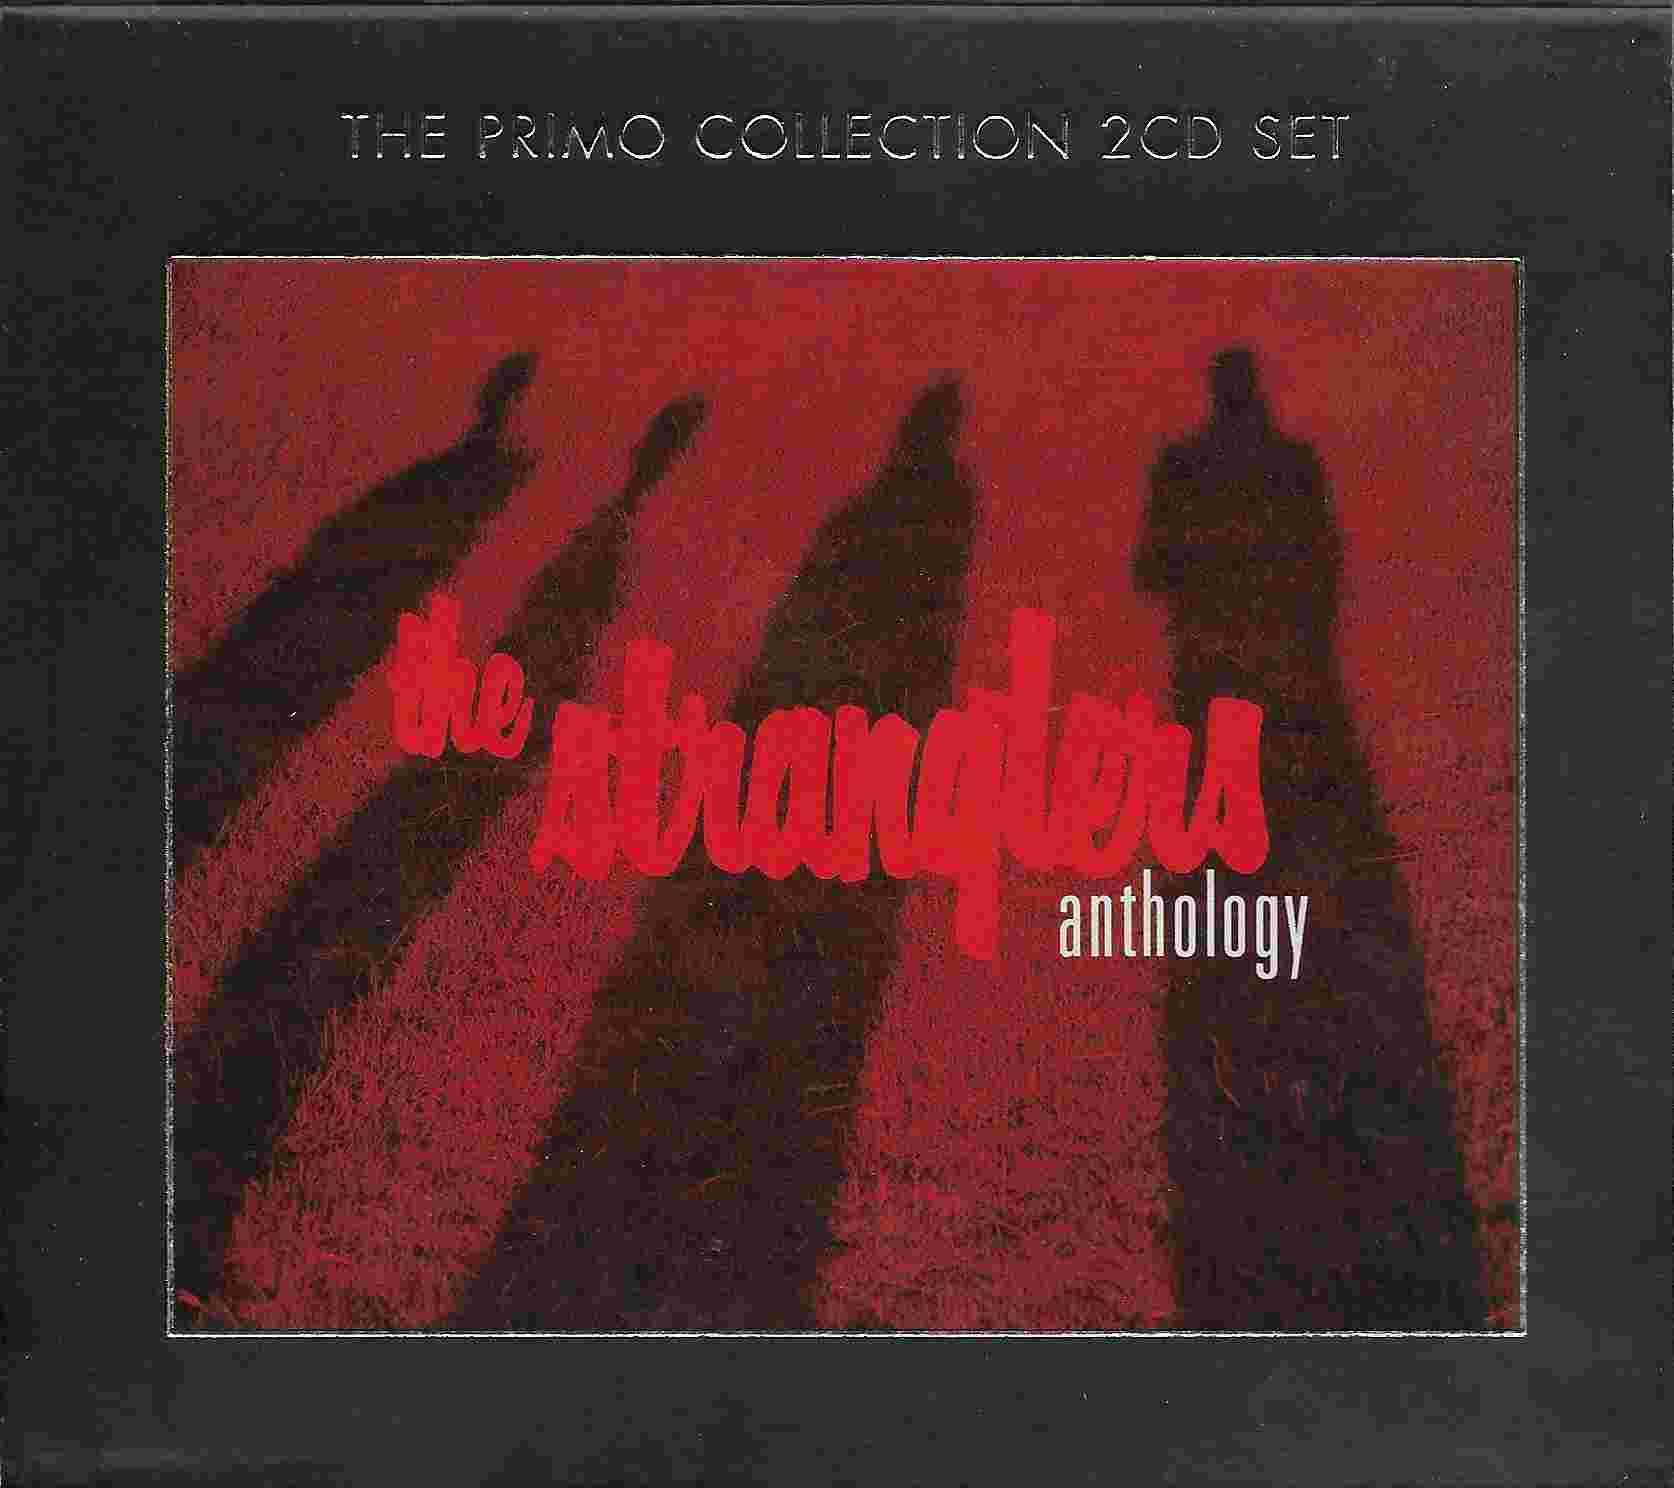 Picture of PRMCD 2004 Anthology by artist The Stranglers from The Stranglers